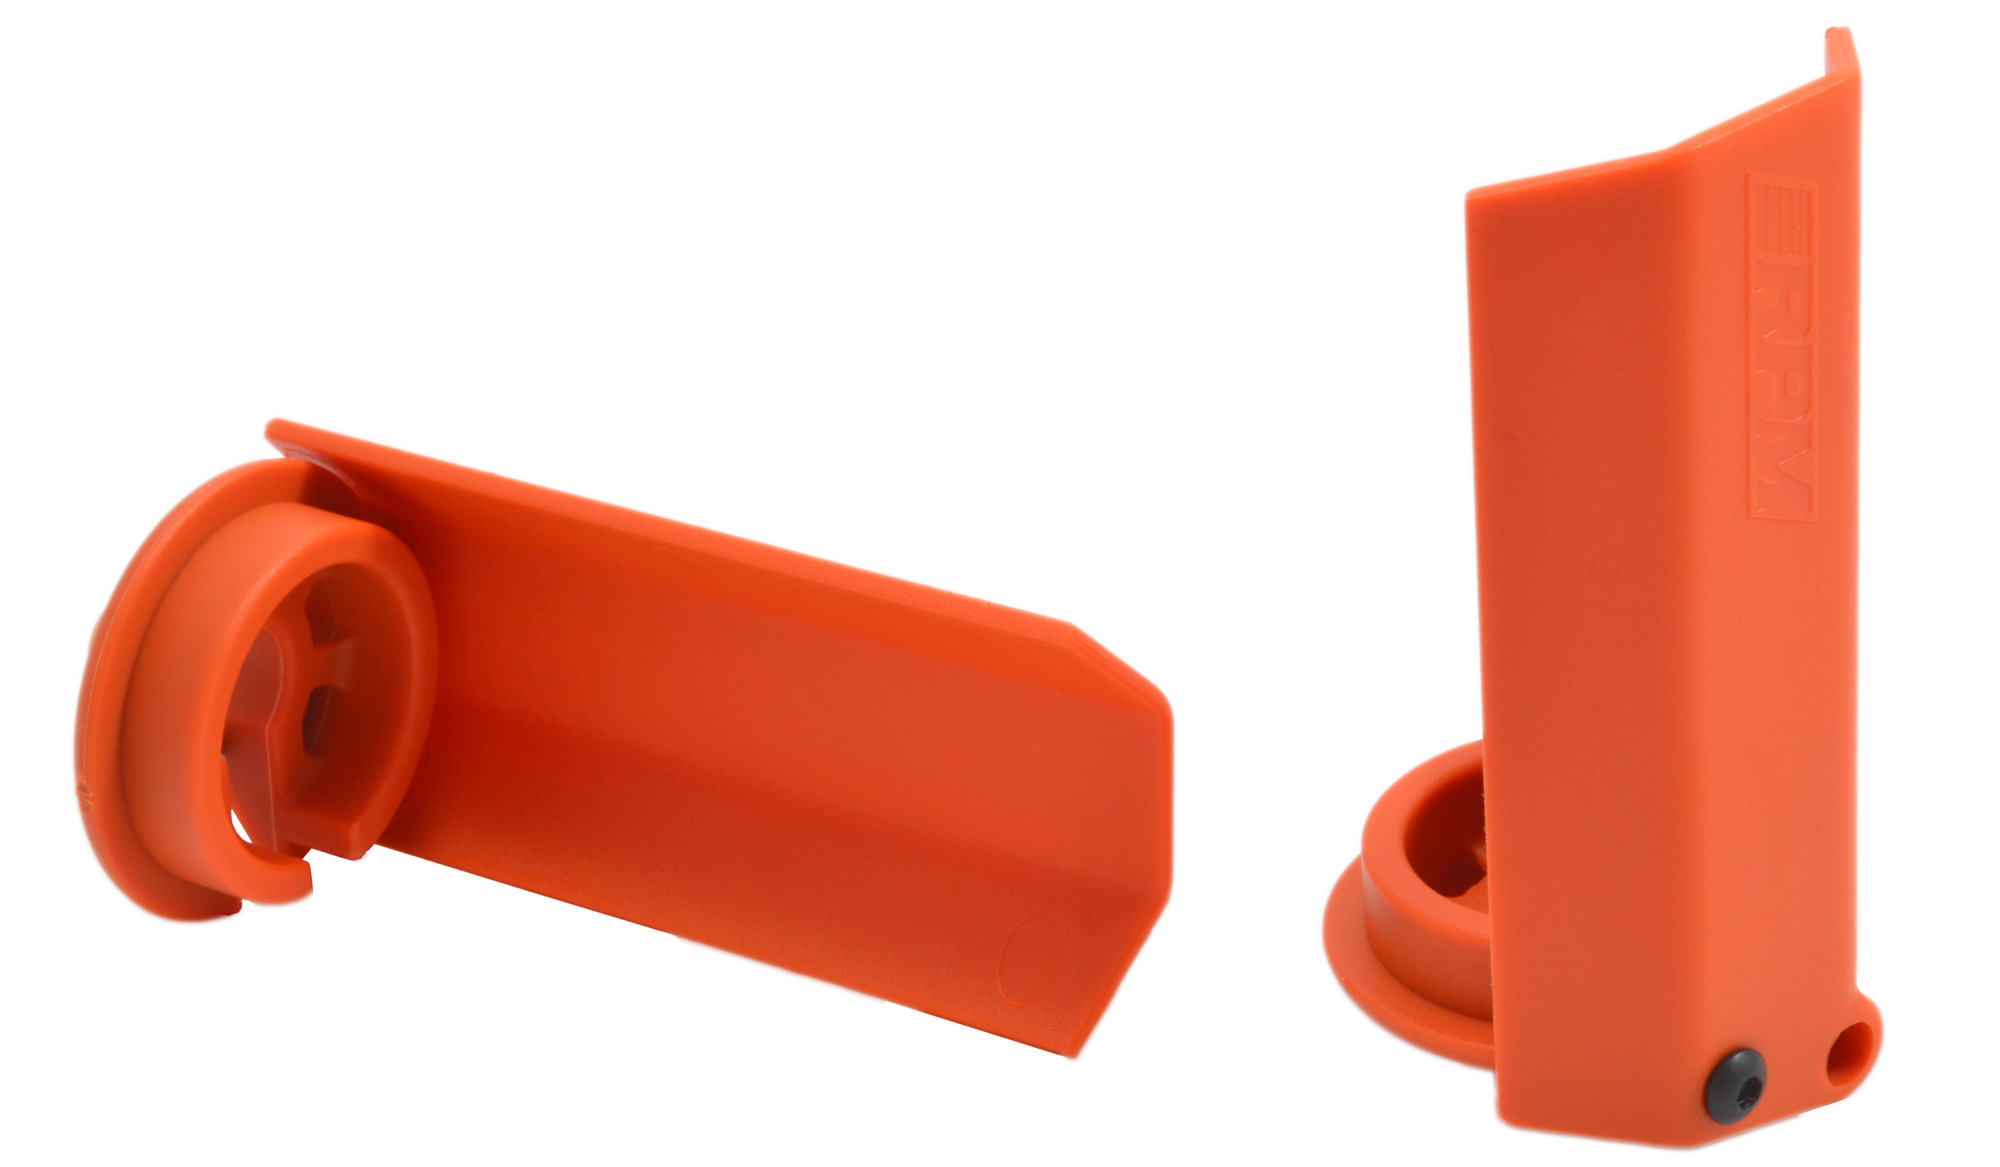 RPM Shock Shaft Guards & Orange A-arms for the Traxxas X-Maxx